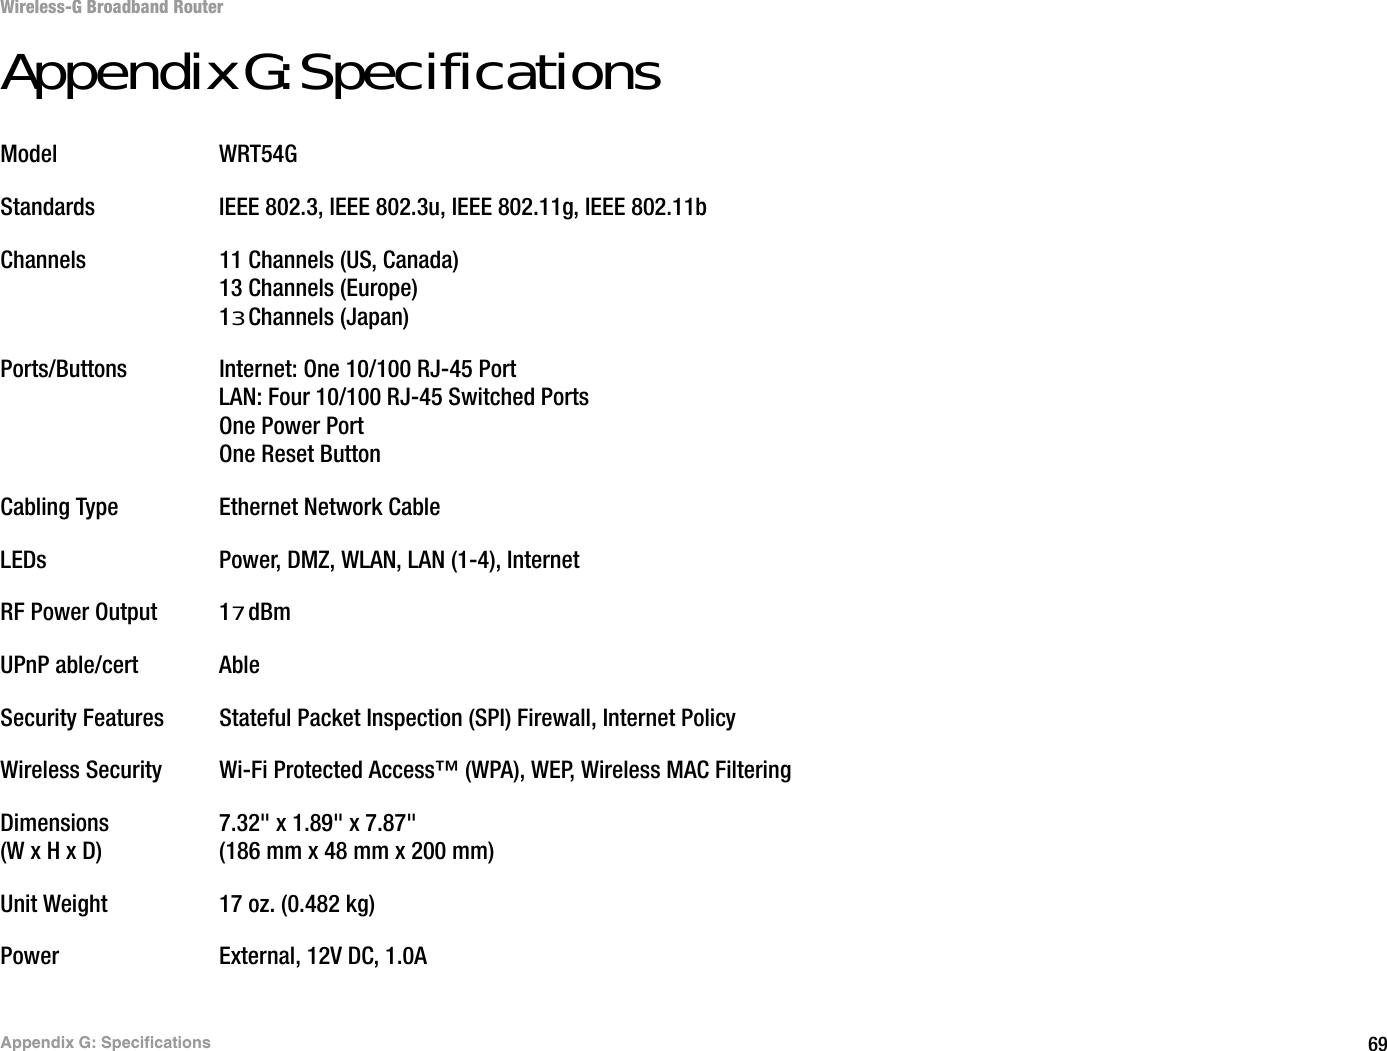 69Appendix G: SpecificationsWireless-G Broadband RouterAppendix G: SpecificationsModel WRT54GStandards IEEE 802.3, IEEE 802.3u, IEEE 802.11g, IEEE 802.11bChannels 11 Channels (US, Canada)13 Channels (Europe)13 Channels (Japan)Ports/Buttons Internet: One 10/100 RJ-45 PortLAN: Four 10/100 RJ-45 Switched PortsOne Power PortOne Reset ButtonCabling Type Ethernet Network CableLEDs Power, DMZ, WLAN, LAN (1-4), InternetRF Power Output 17 dBmUPnP able/cert AbleSecurity Features Stateful Packet Inspection (SPI) Firewall, Internet PolicyWireless Security Wi-Fi Protected Access™ (WPA), WEP, Wireless MAC FilteringDimensions 7.32&quot; x 1.89&quot; x 7.87&quot;(W x H x D) (186 mm x 48 mm x 200 mm)Unit Weight 17 oz. (0.482 kg)Power External, 12V DC, 1.0A